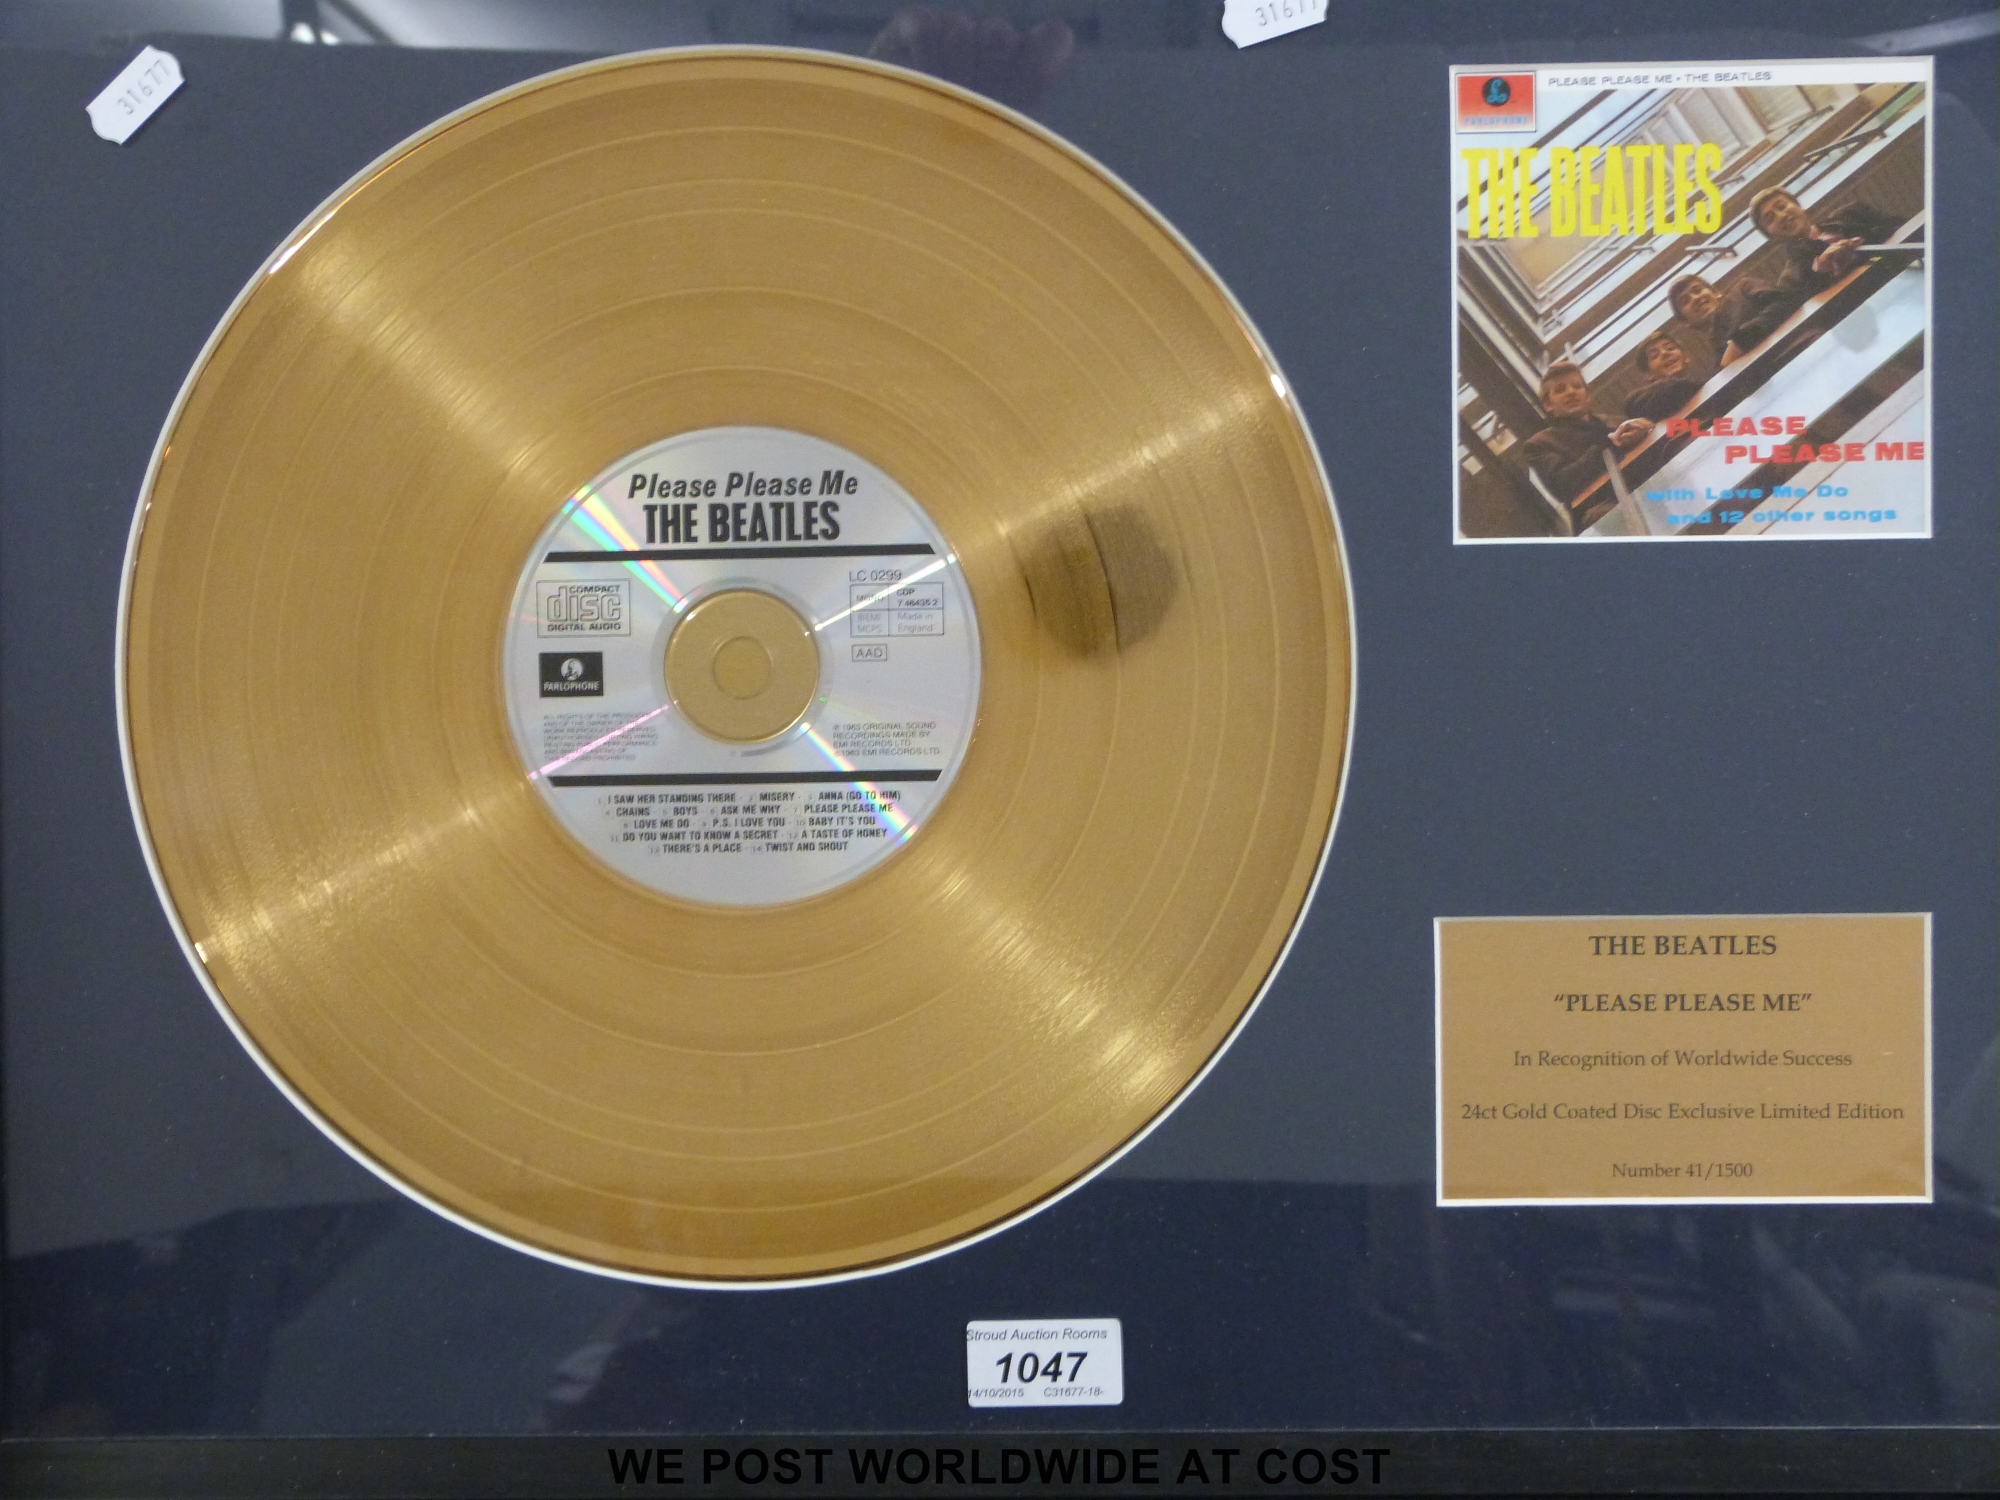 A framed (18” x 23”) “Gold” disc of The Beatles “Please Please Me” LP.